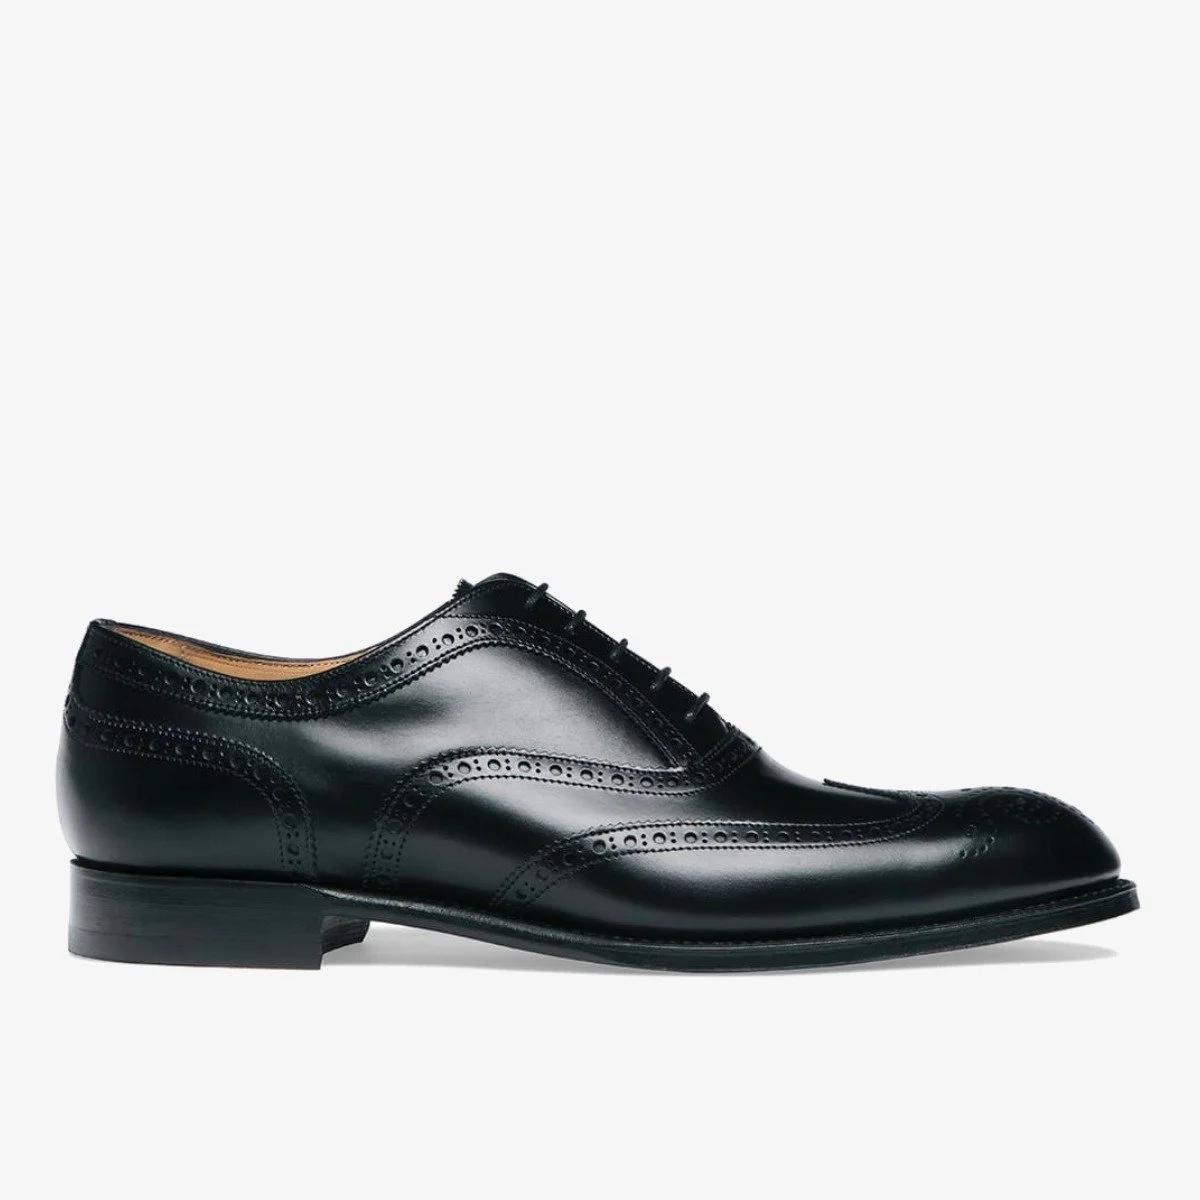 Cheaney Arthur III black brogue oxford shoes - Rubber soles